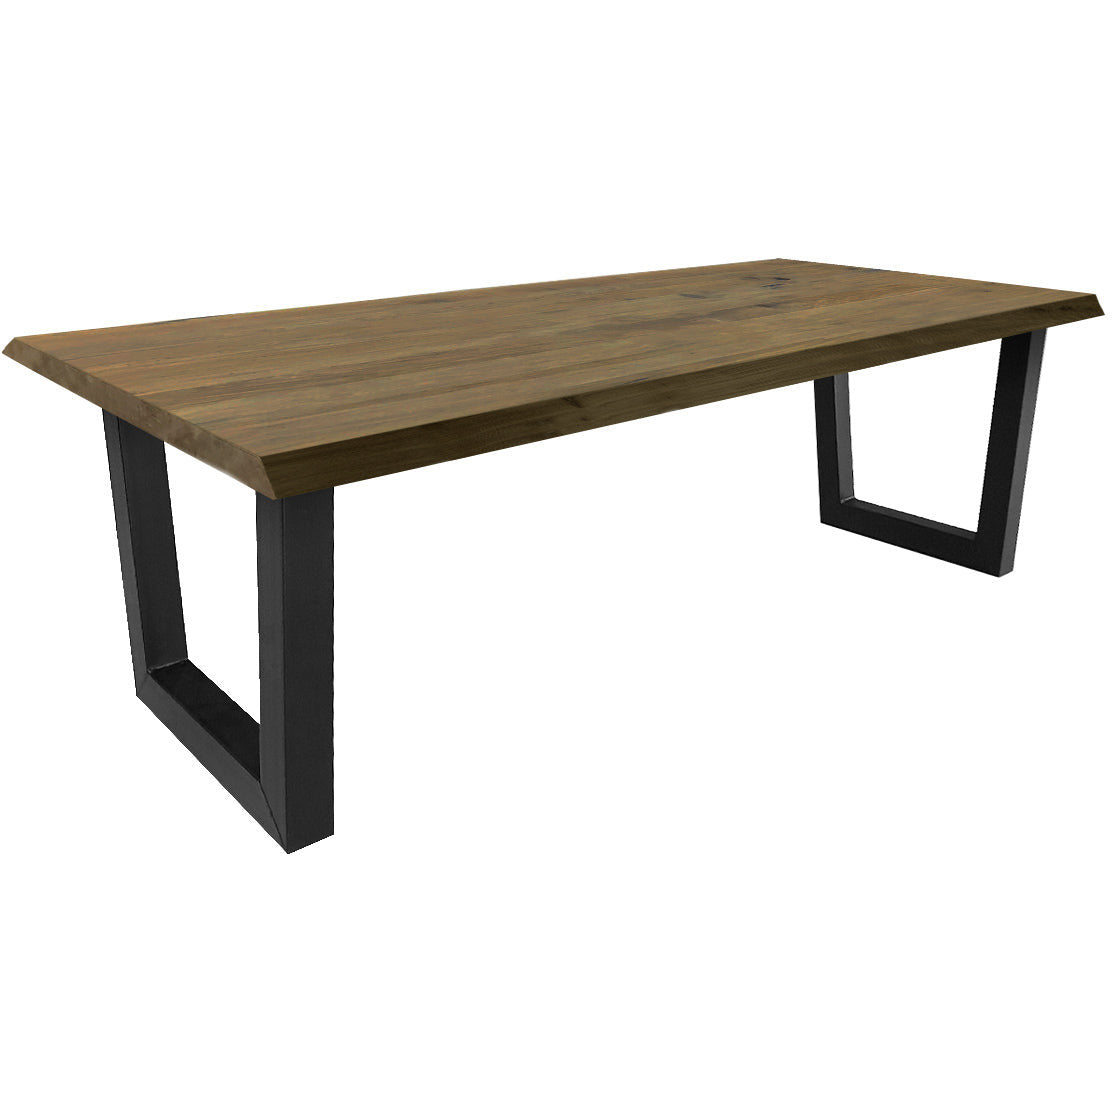 Dining table | Rectangle | Warm brown | Oak wood | Lacquered | U-leg